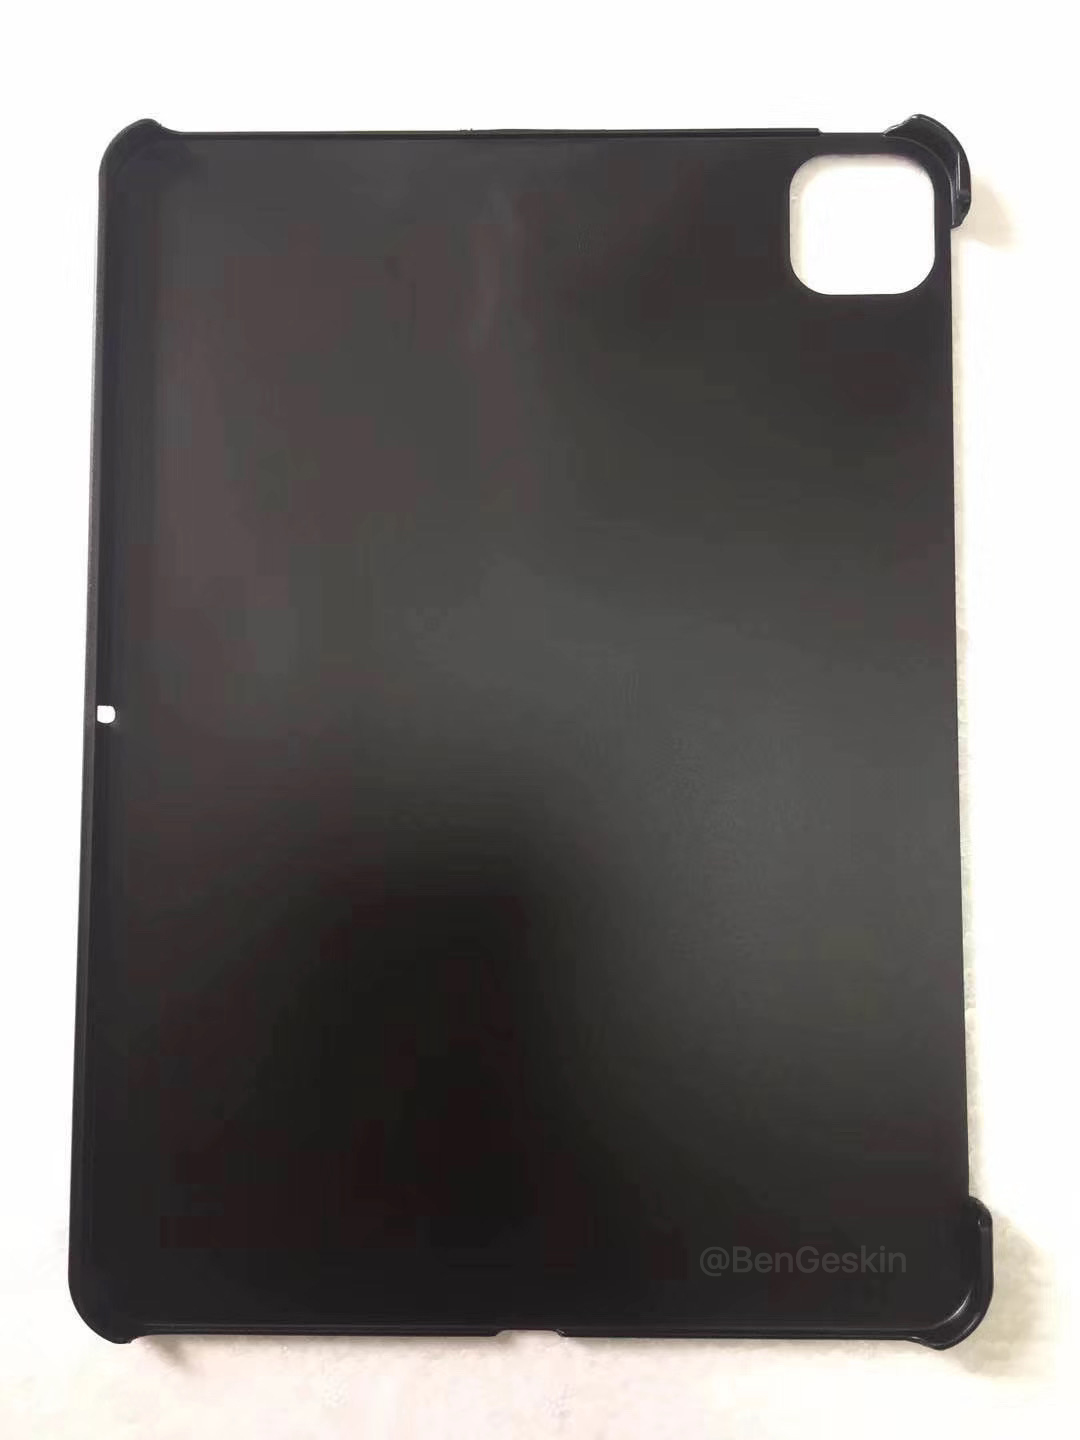 Alleged Case for New iPad Pro Features Square Camera Cutout [Images]